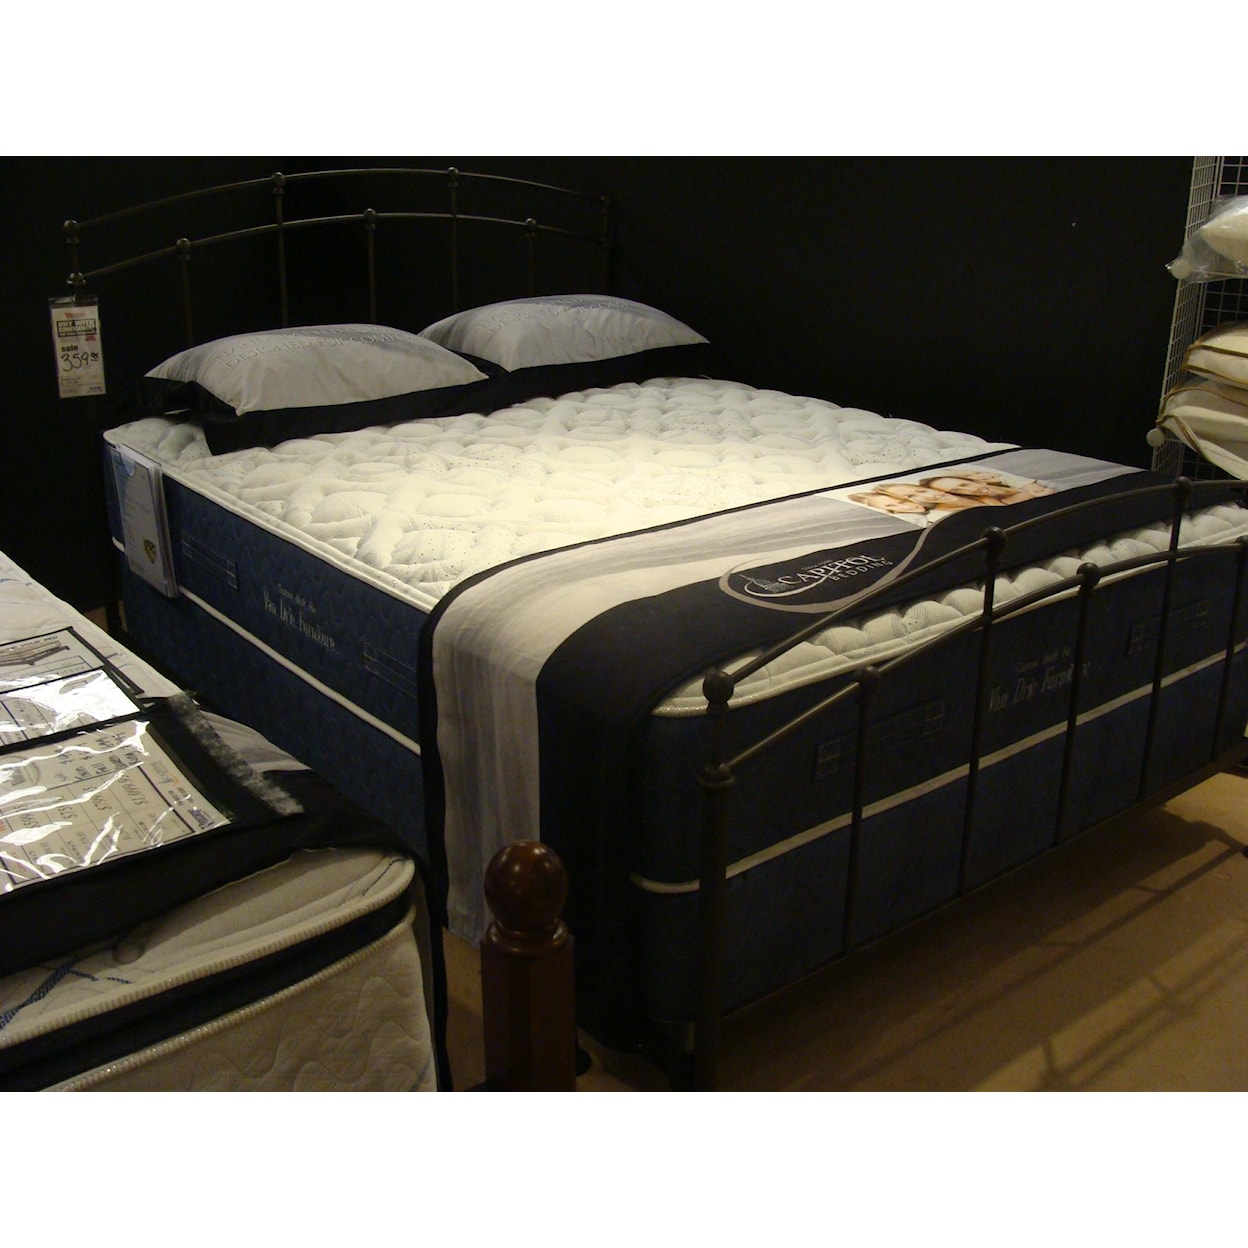 Capitol Bedding Melbourne Firm Full Mattress Only